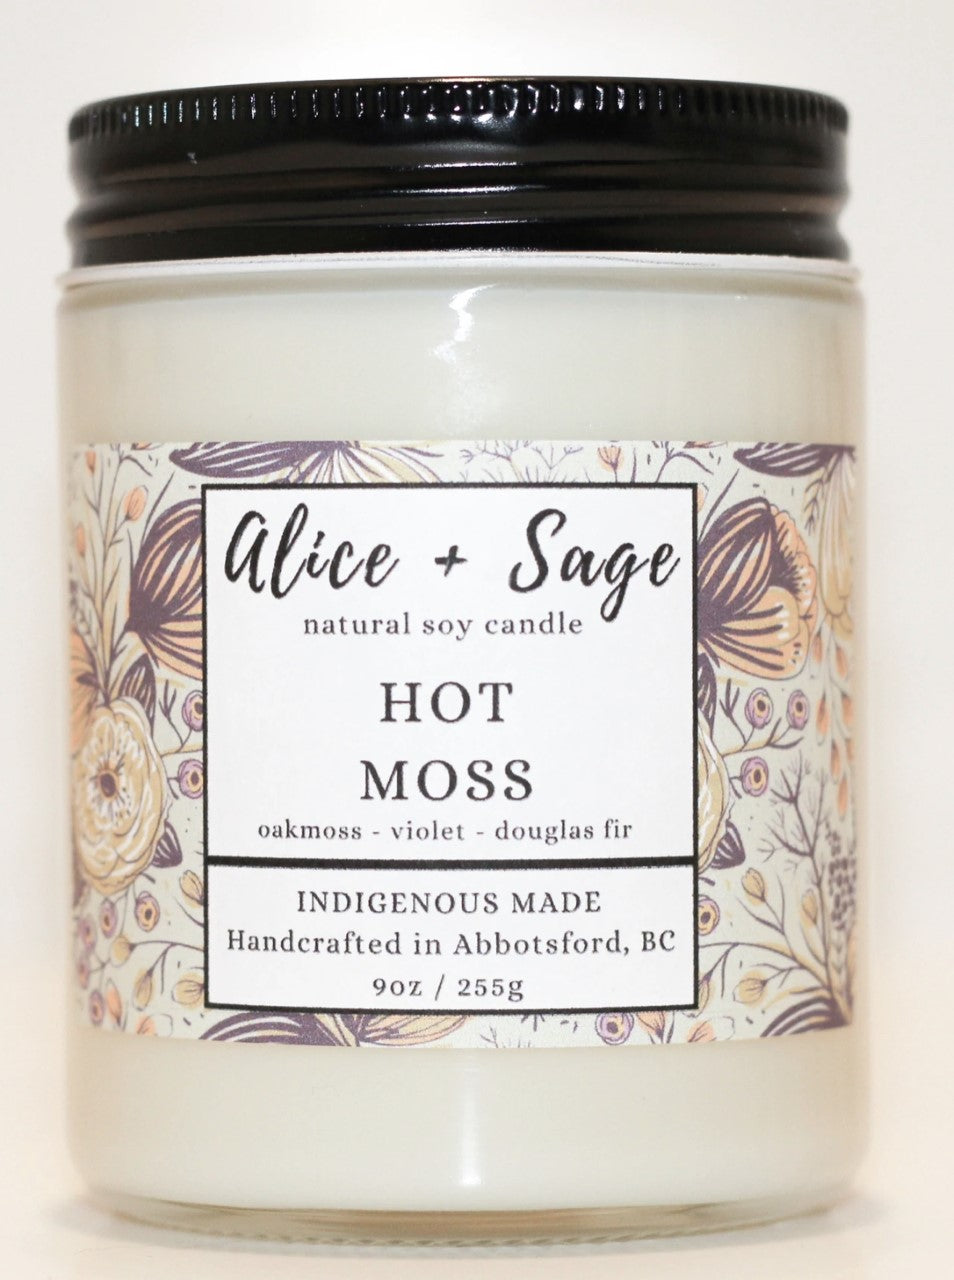 HOT MOSS CANDLE